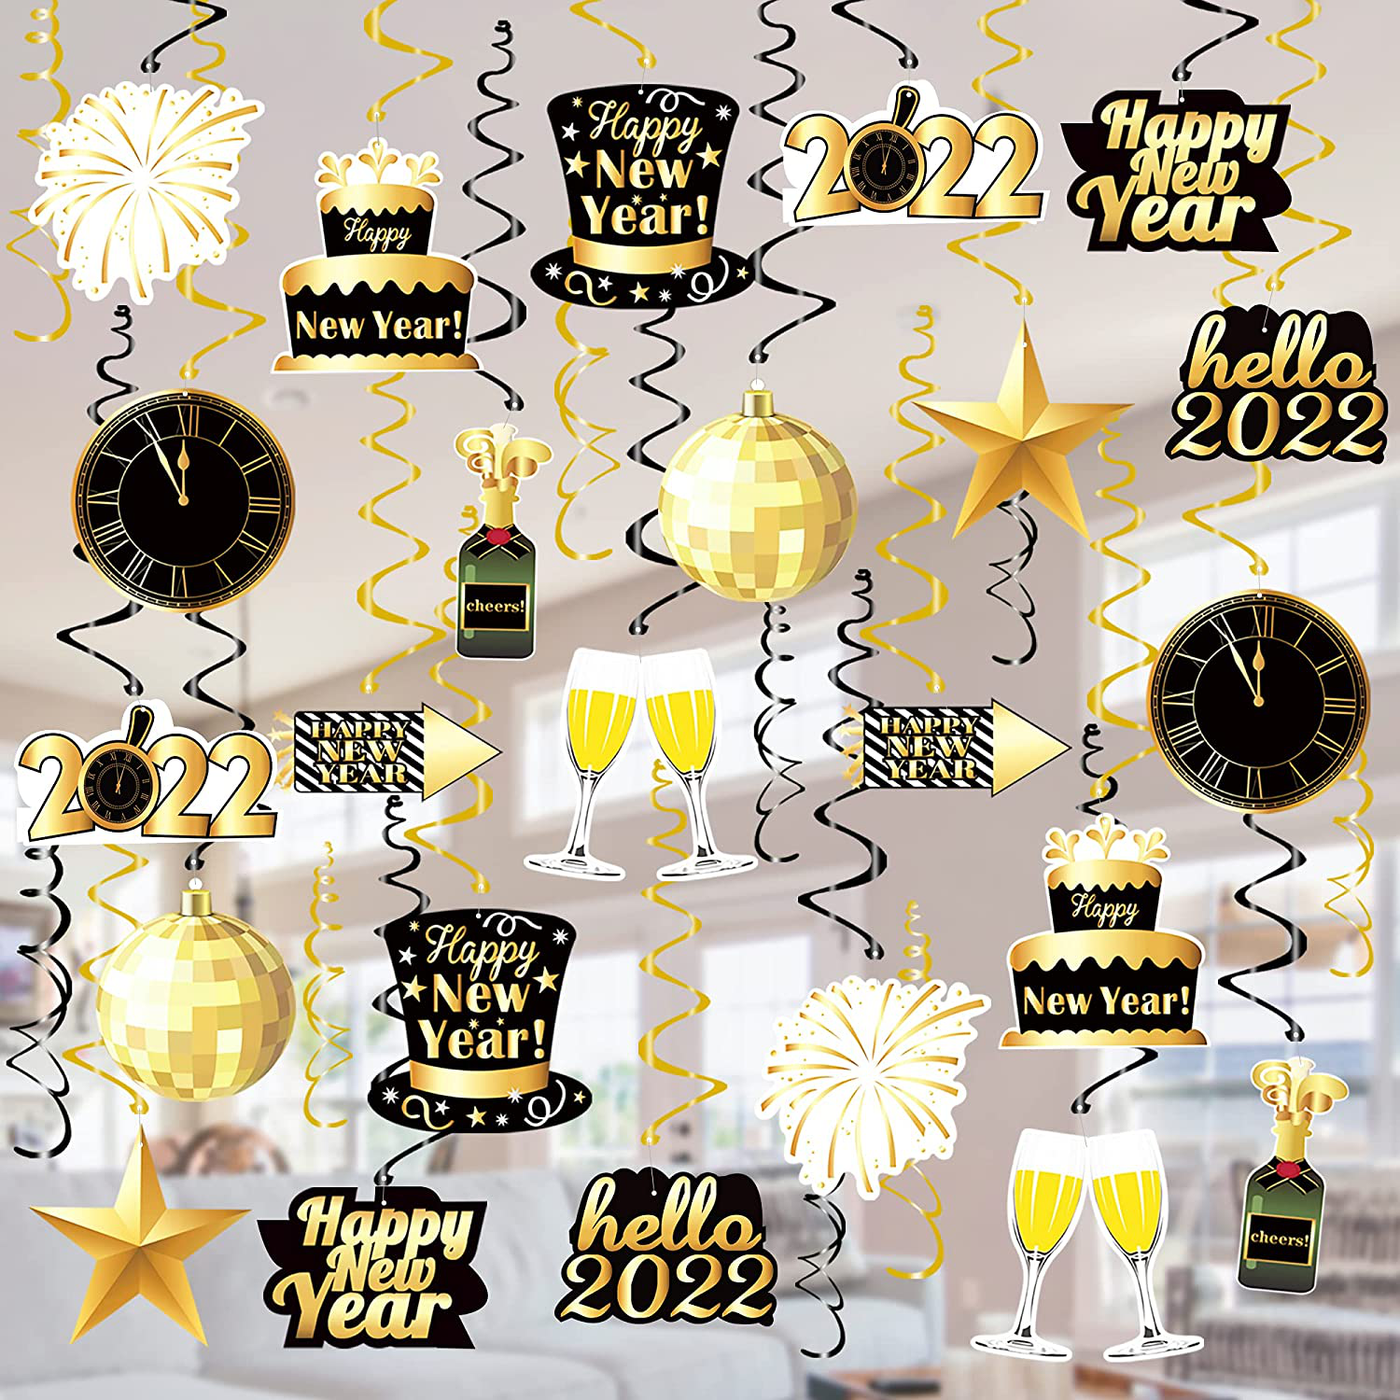 Tifeson 36 Pcs Happy New Year Decorations Hanging Swirls - Happy New Year Decorations 2022 - New Year's Eve Party Decorations Supplies 2022 for Home Office Ceiling (Black and Gold)